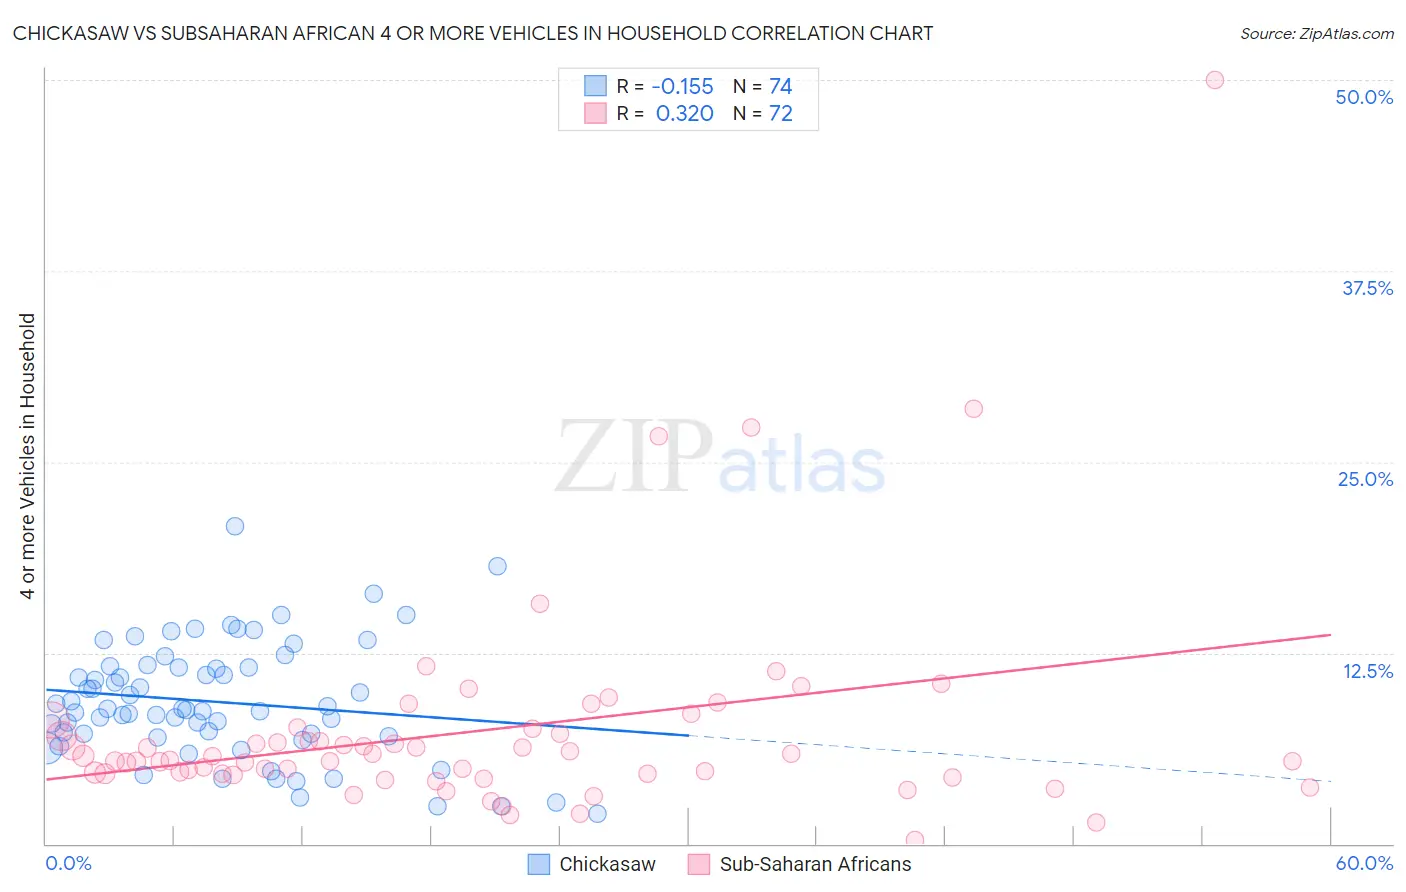 Chickasaw vs Subsaharan African 4 or more Vehicles in Household